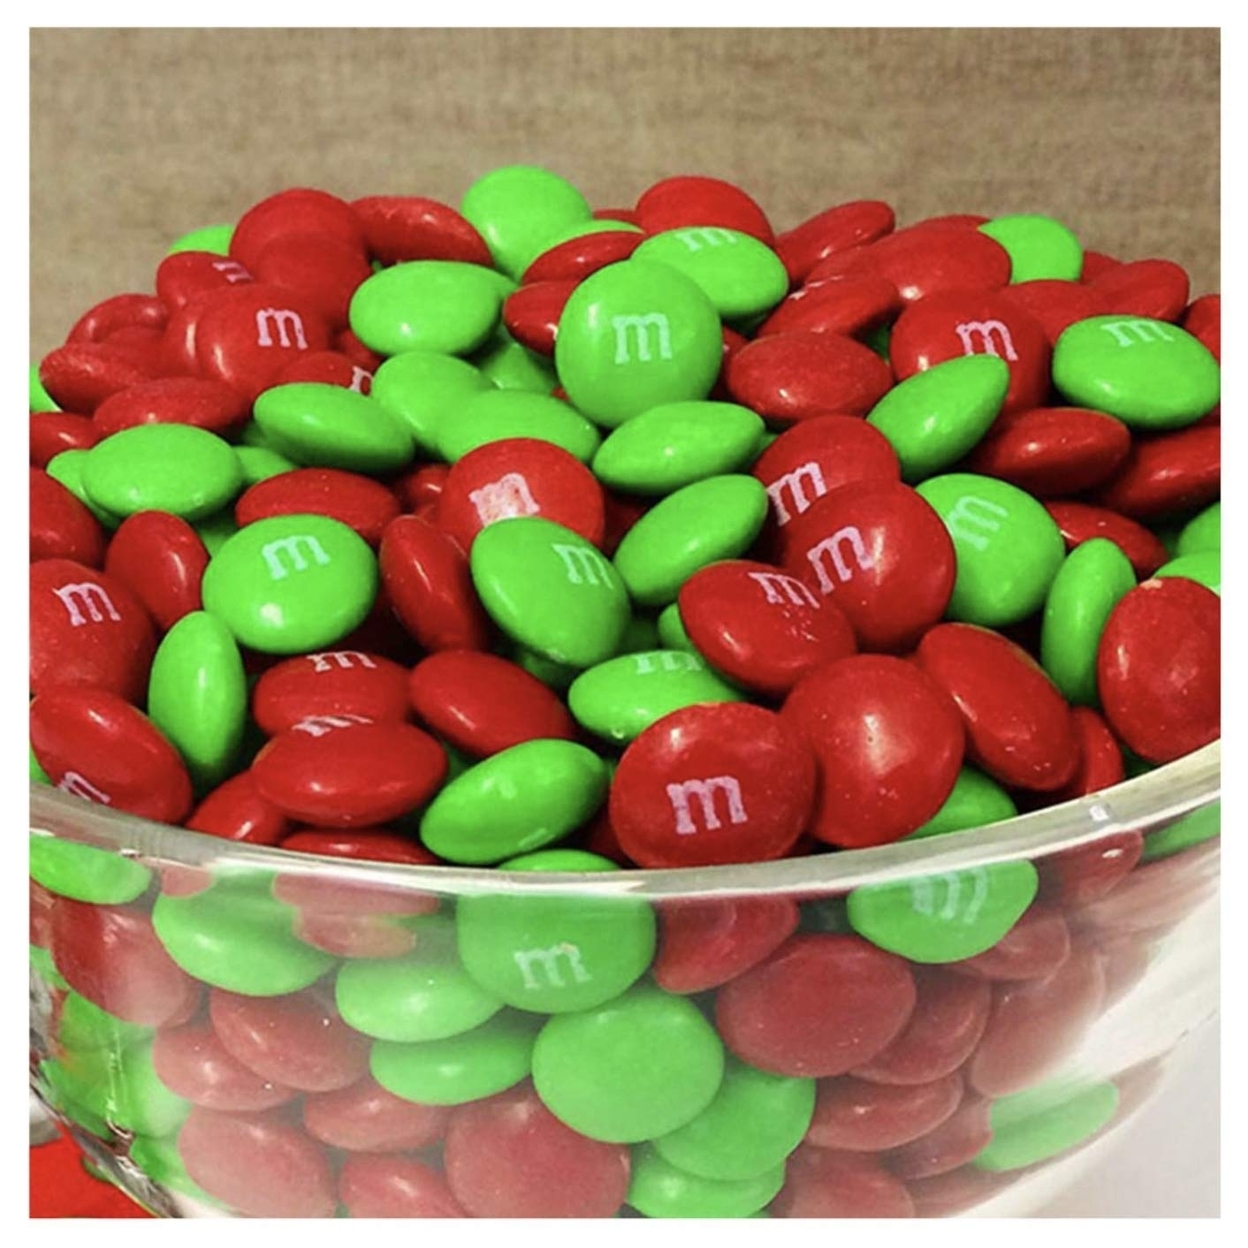 M&M'S Milk Chocolate Holiday Candy (62 Ounce)